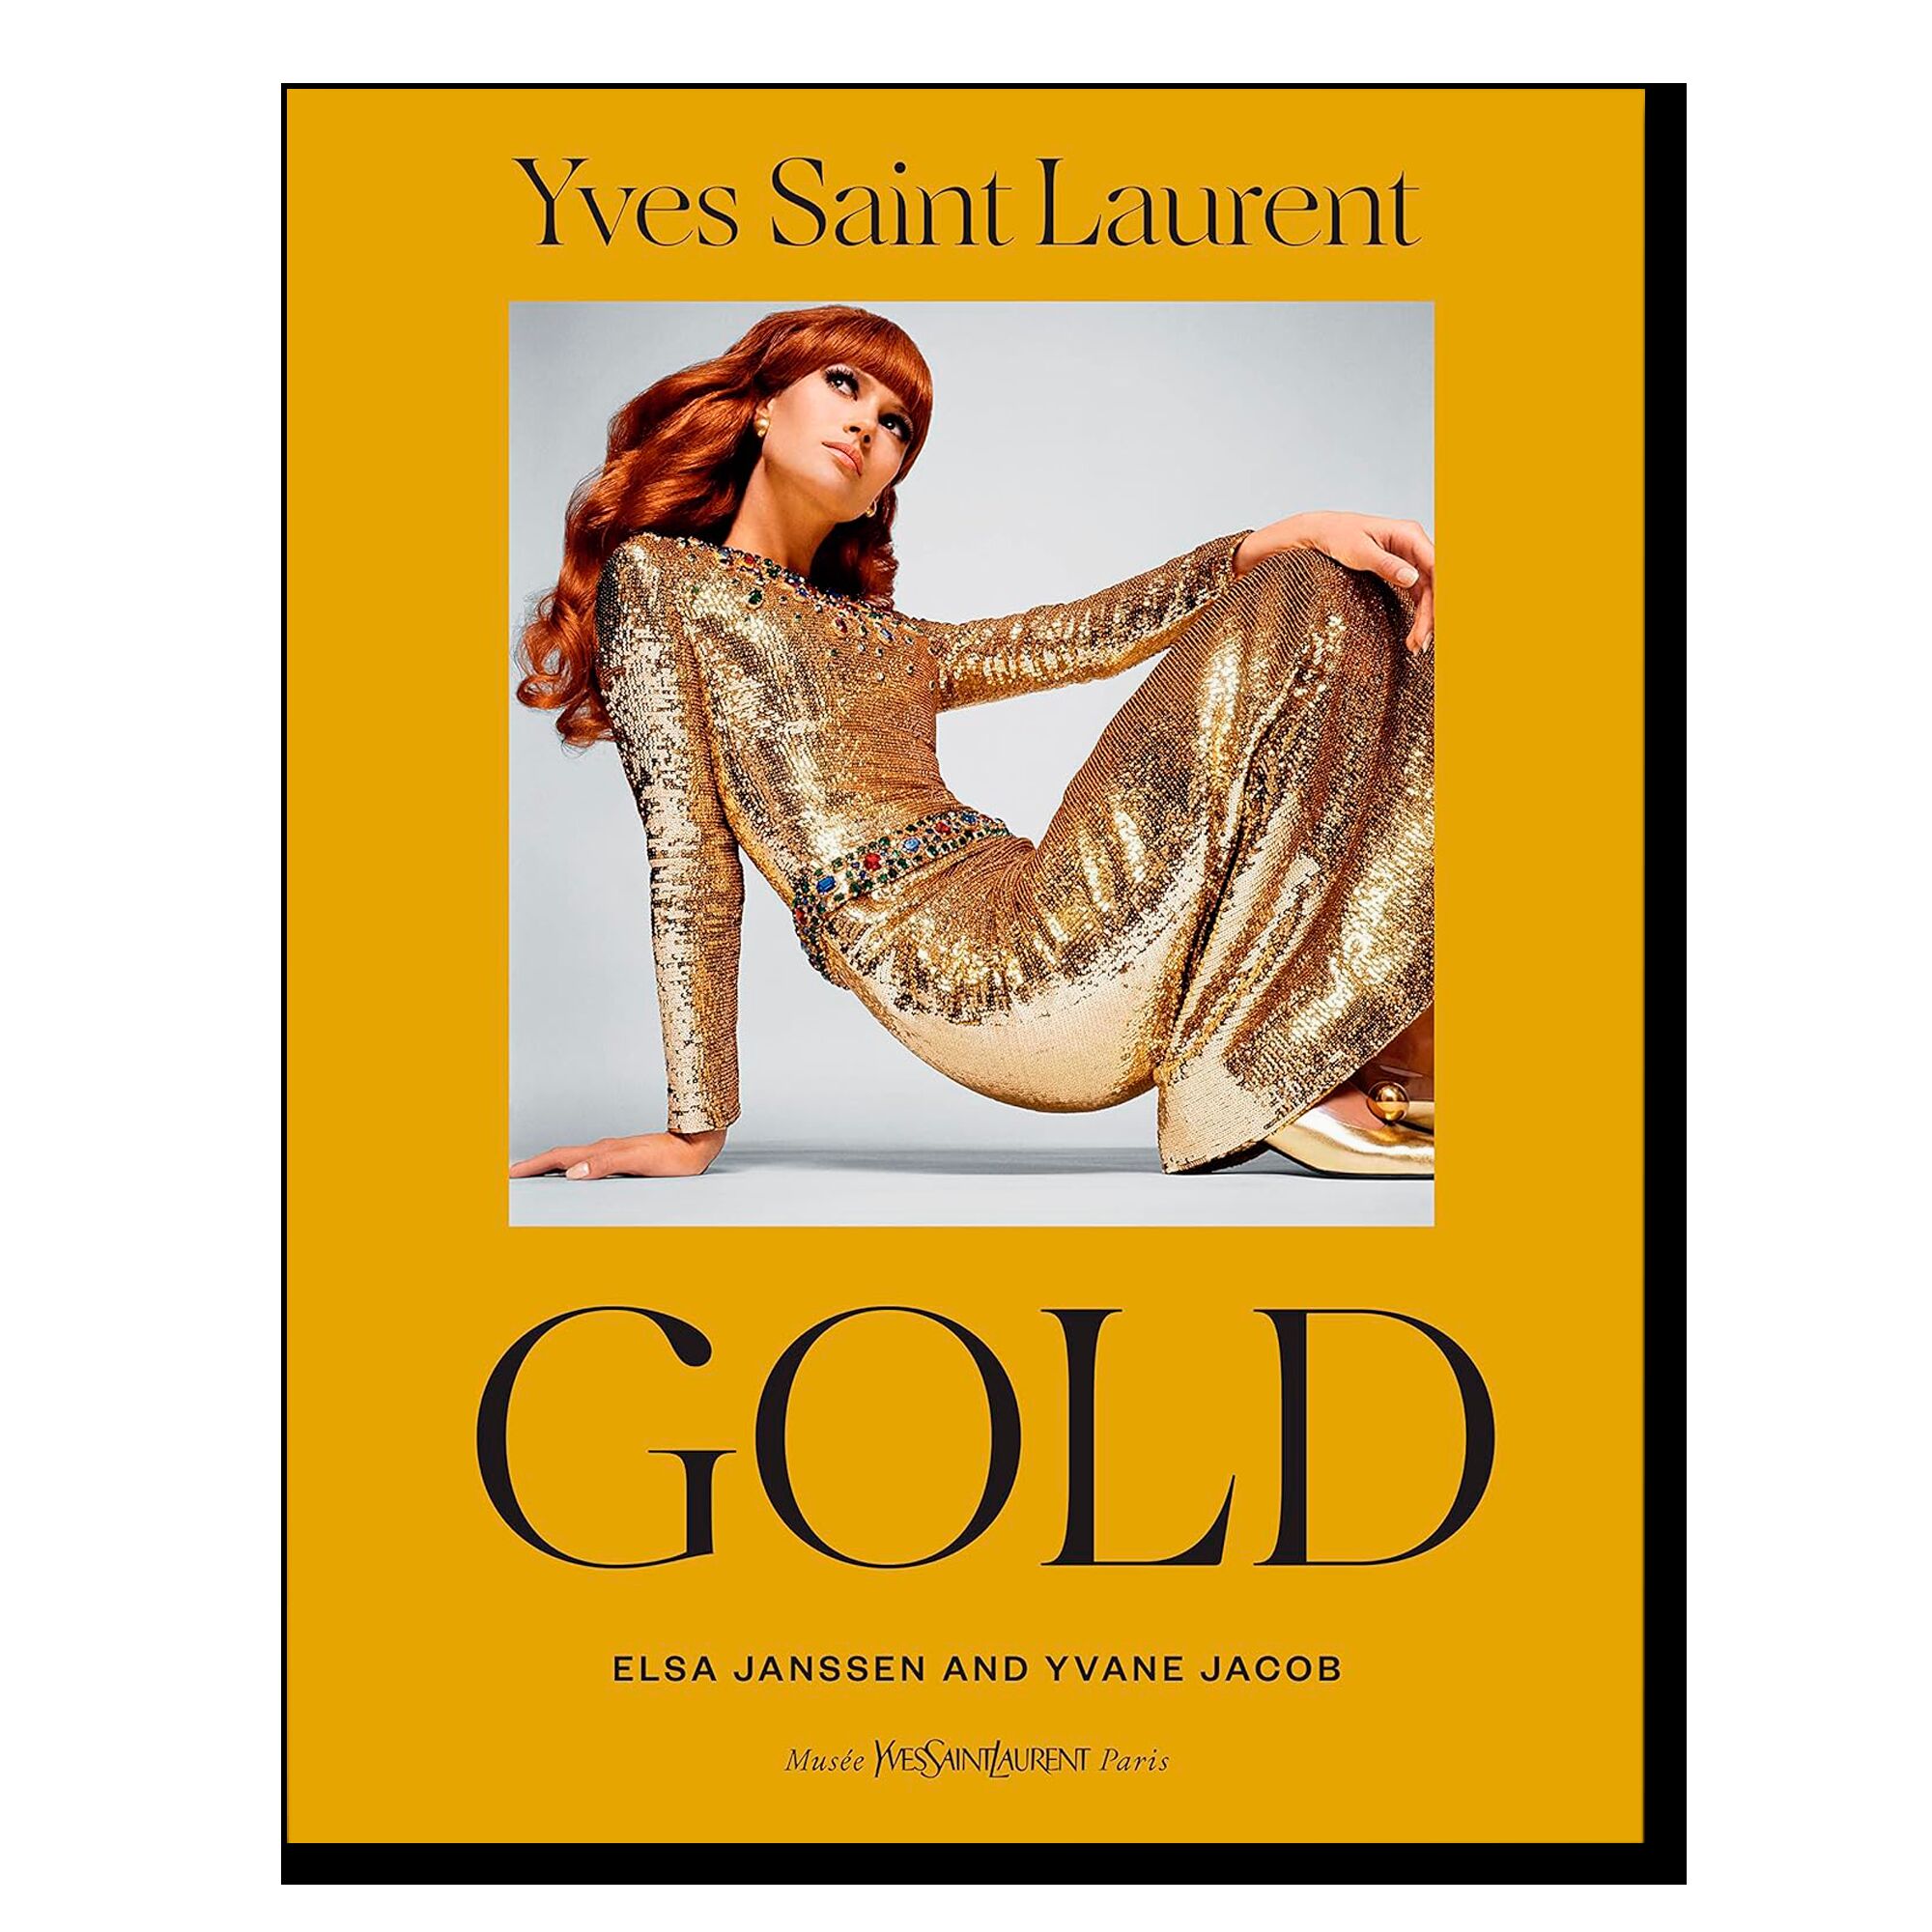 Yves Saint Laurent: Gold: Fashion, Jewelry, Shoes, and Bags